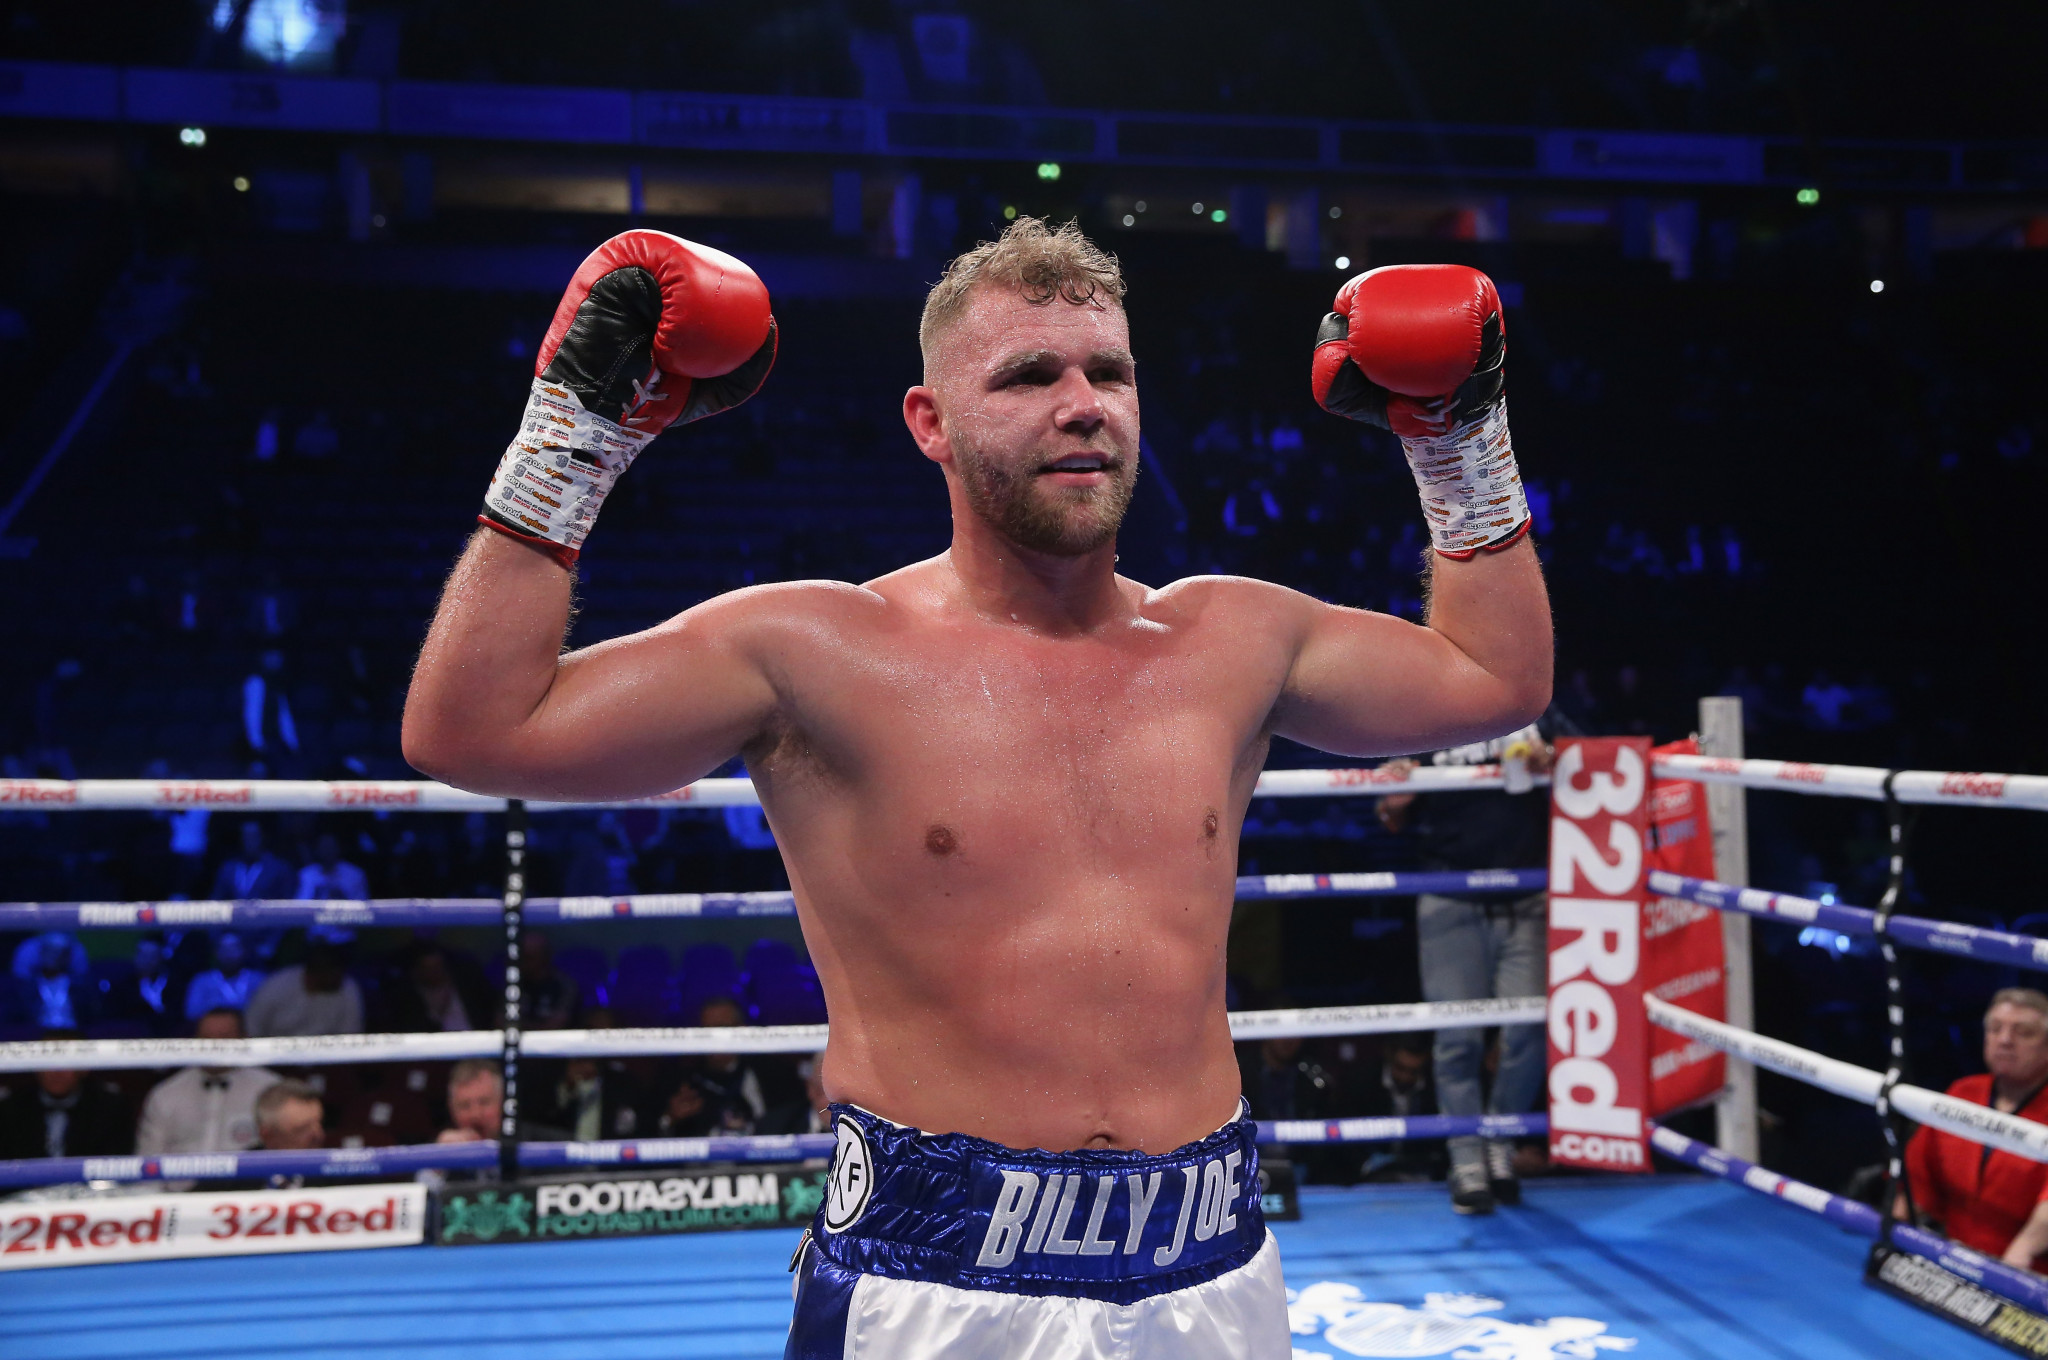 Billy Joe Saunders has had his license suspended by the British Boxing Board of Control ©Getty Images